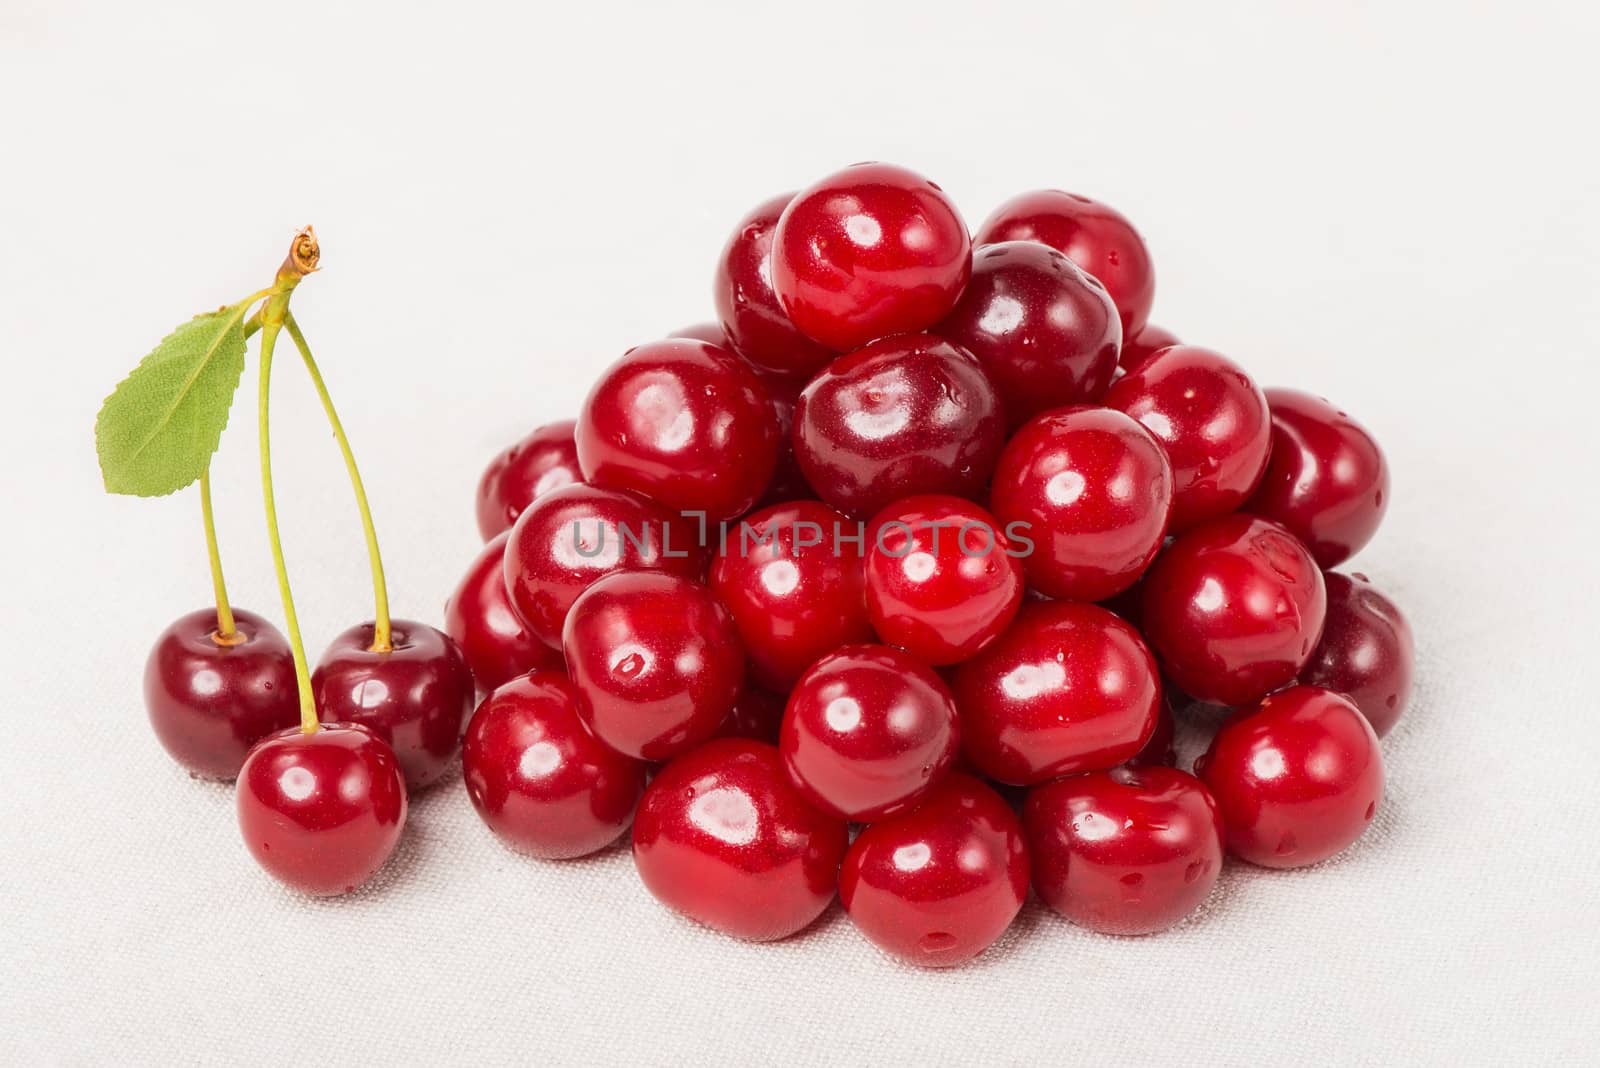 Sweet cherries with water drops 